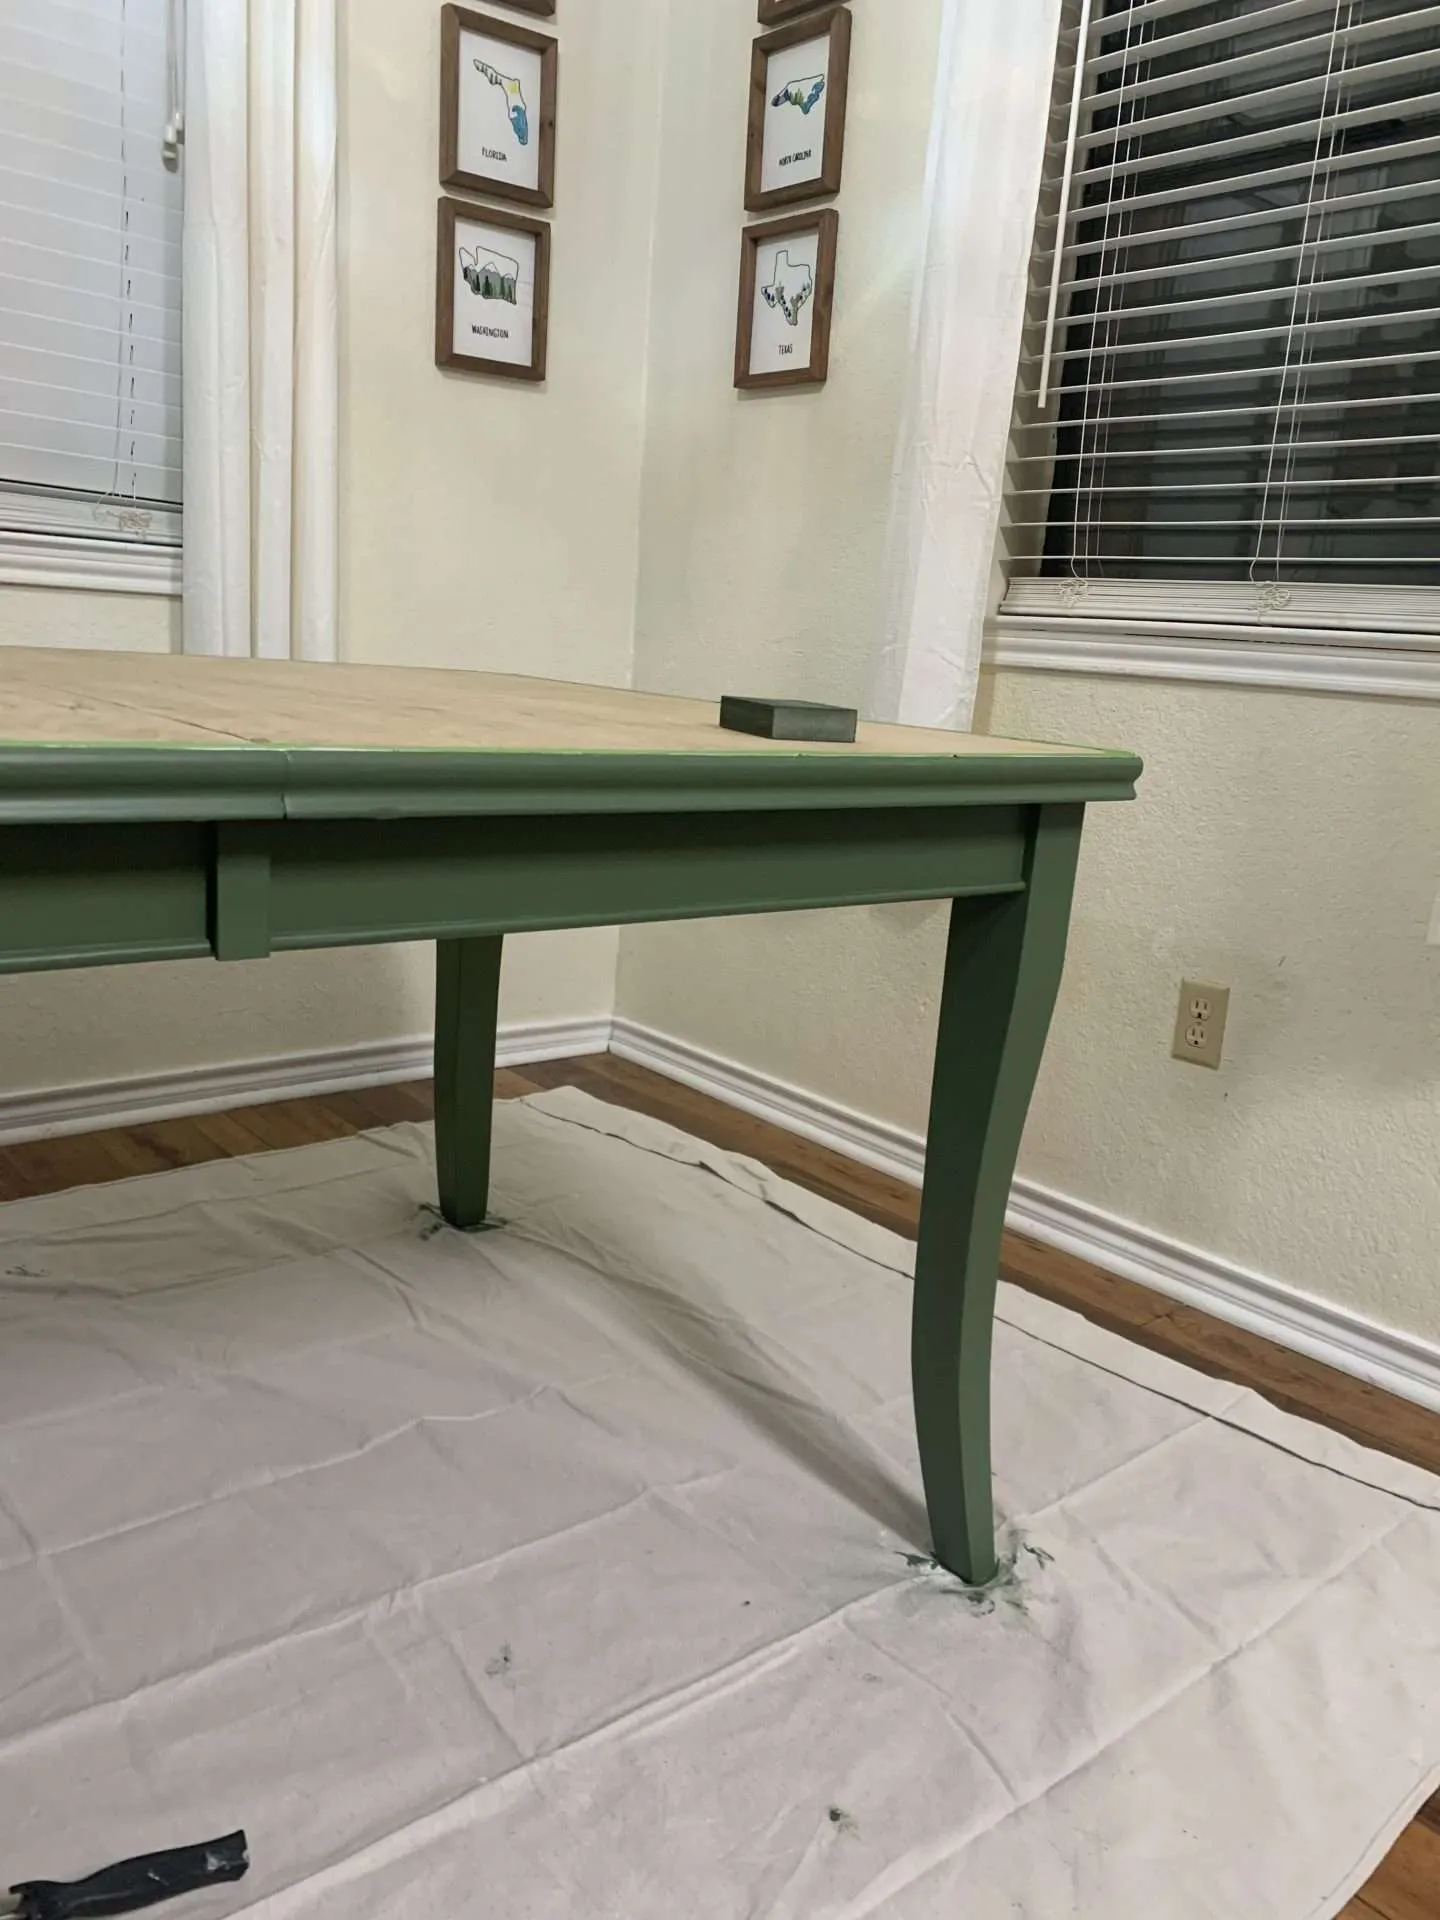 After putting 2 coats of paint on the dining room table.